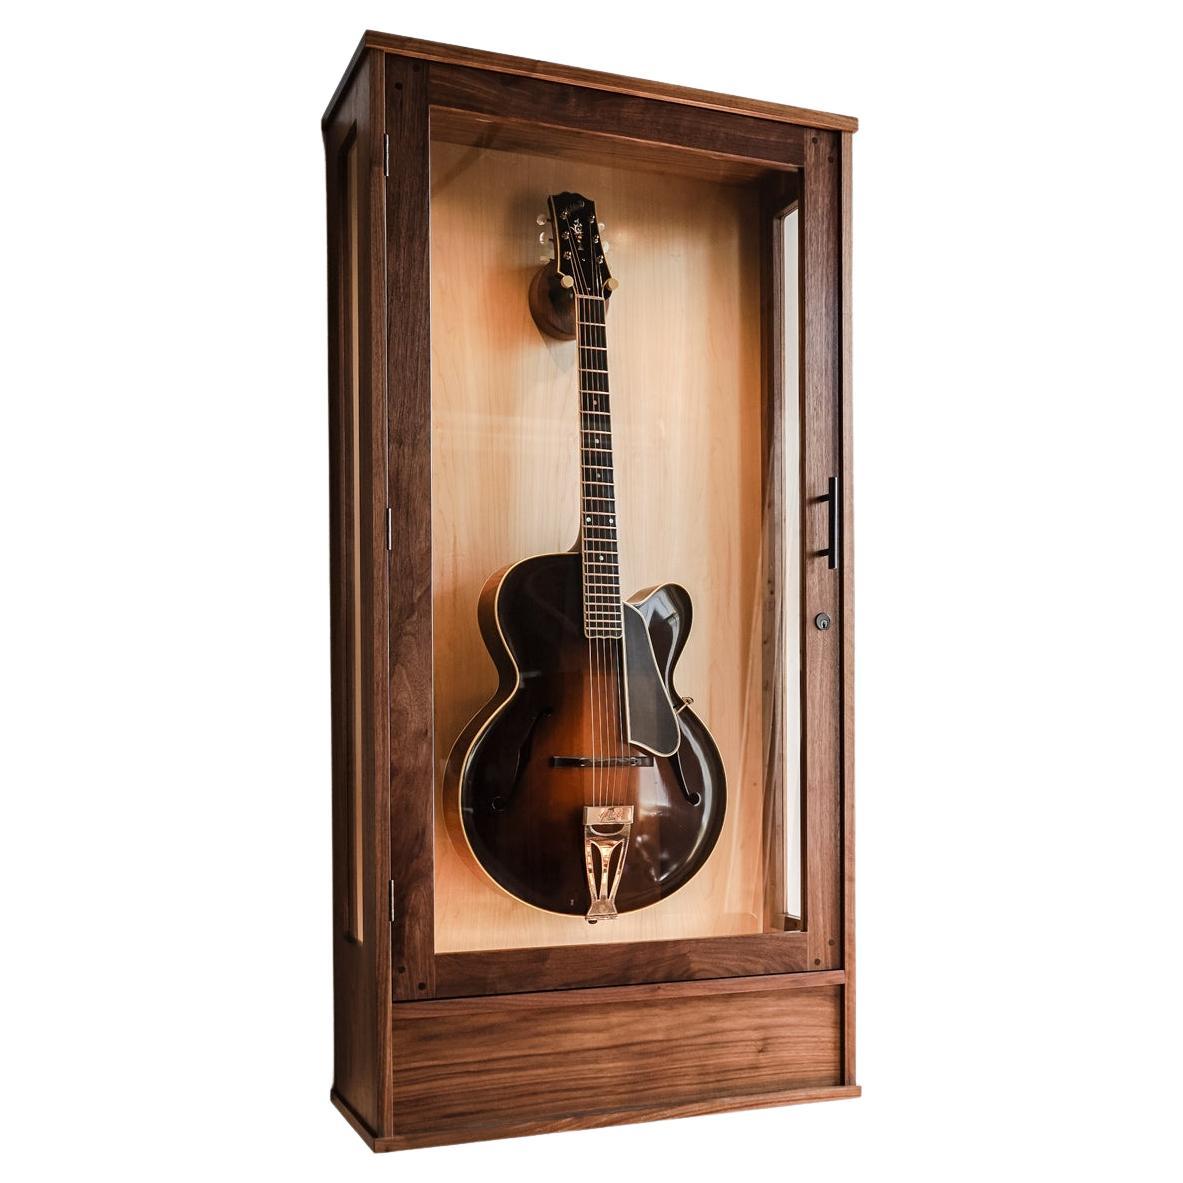 The Nashville was designed to humidify and display a single guitar in a stylish wall-mounted display. Making your guitar easily accessible allows you to play often while saving floor space. Easy to install, each Nashville hangs safely on a French